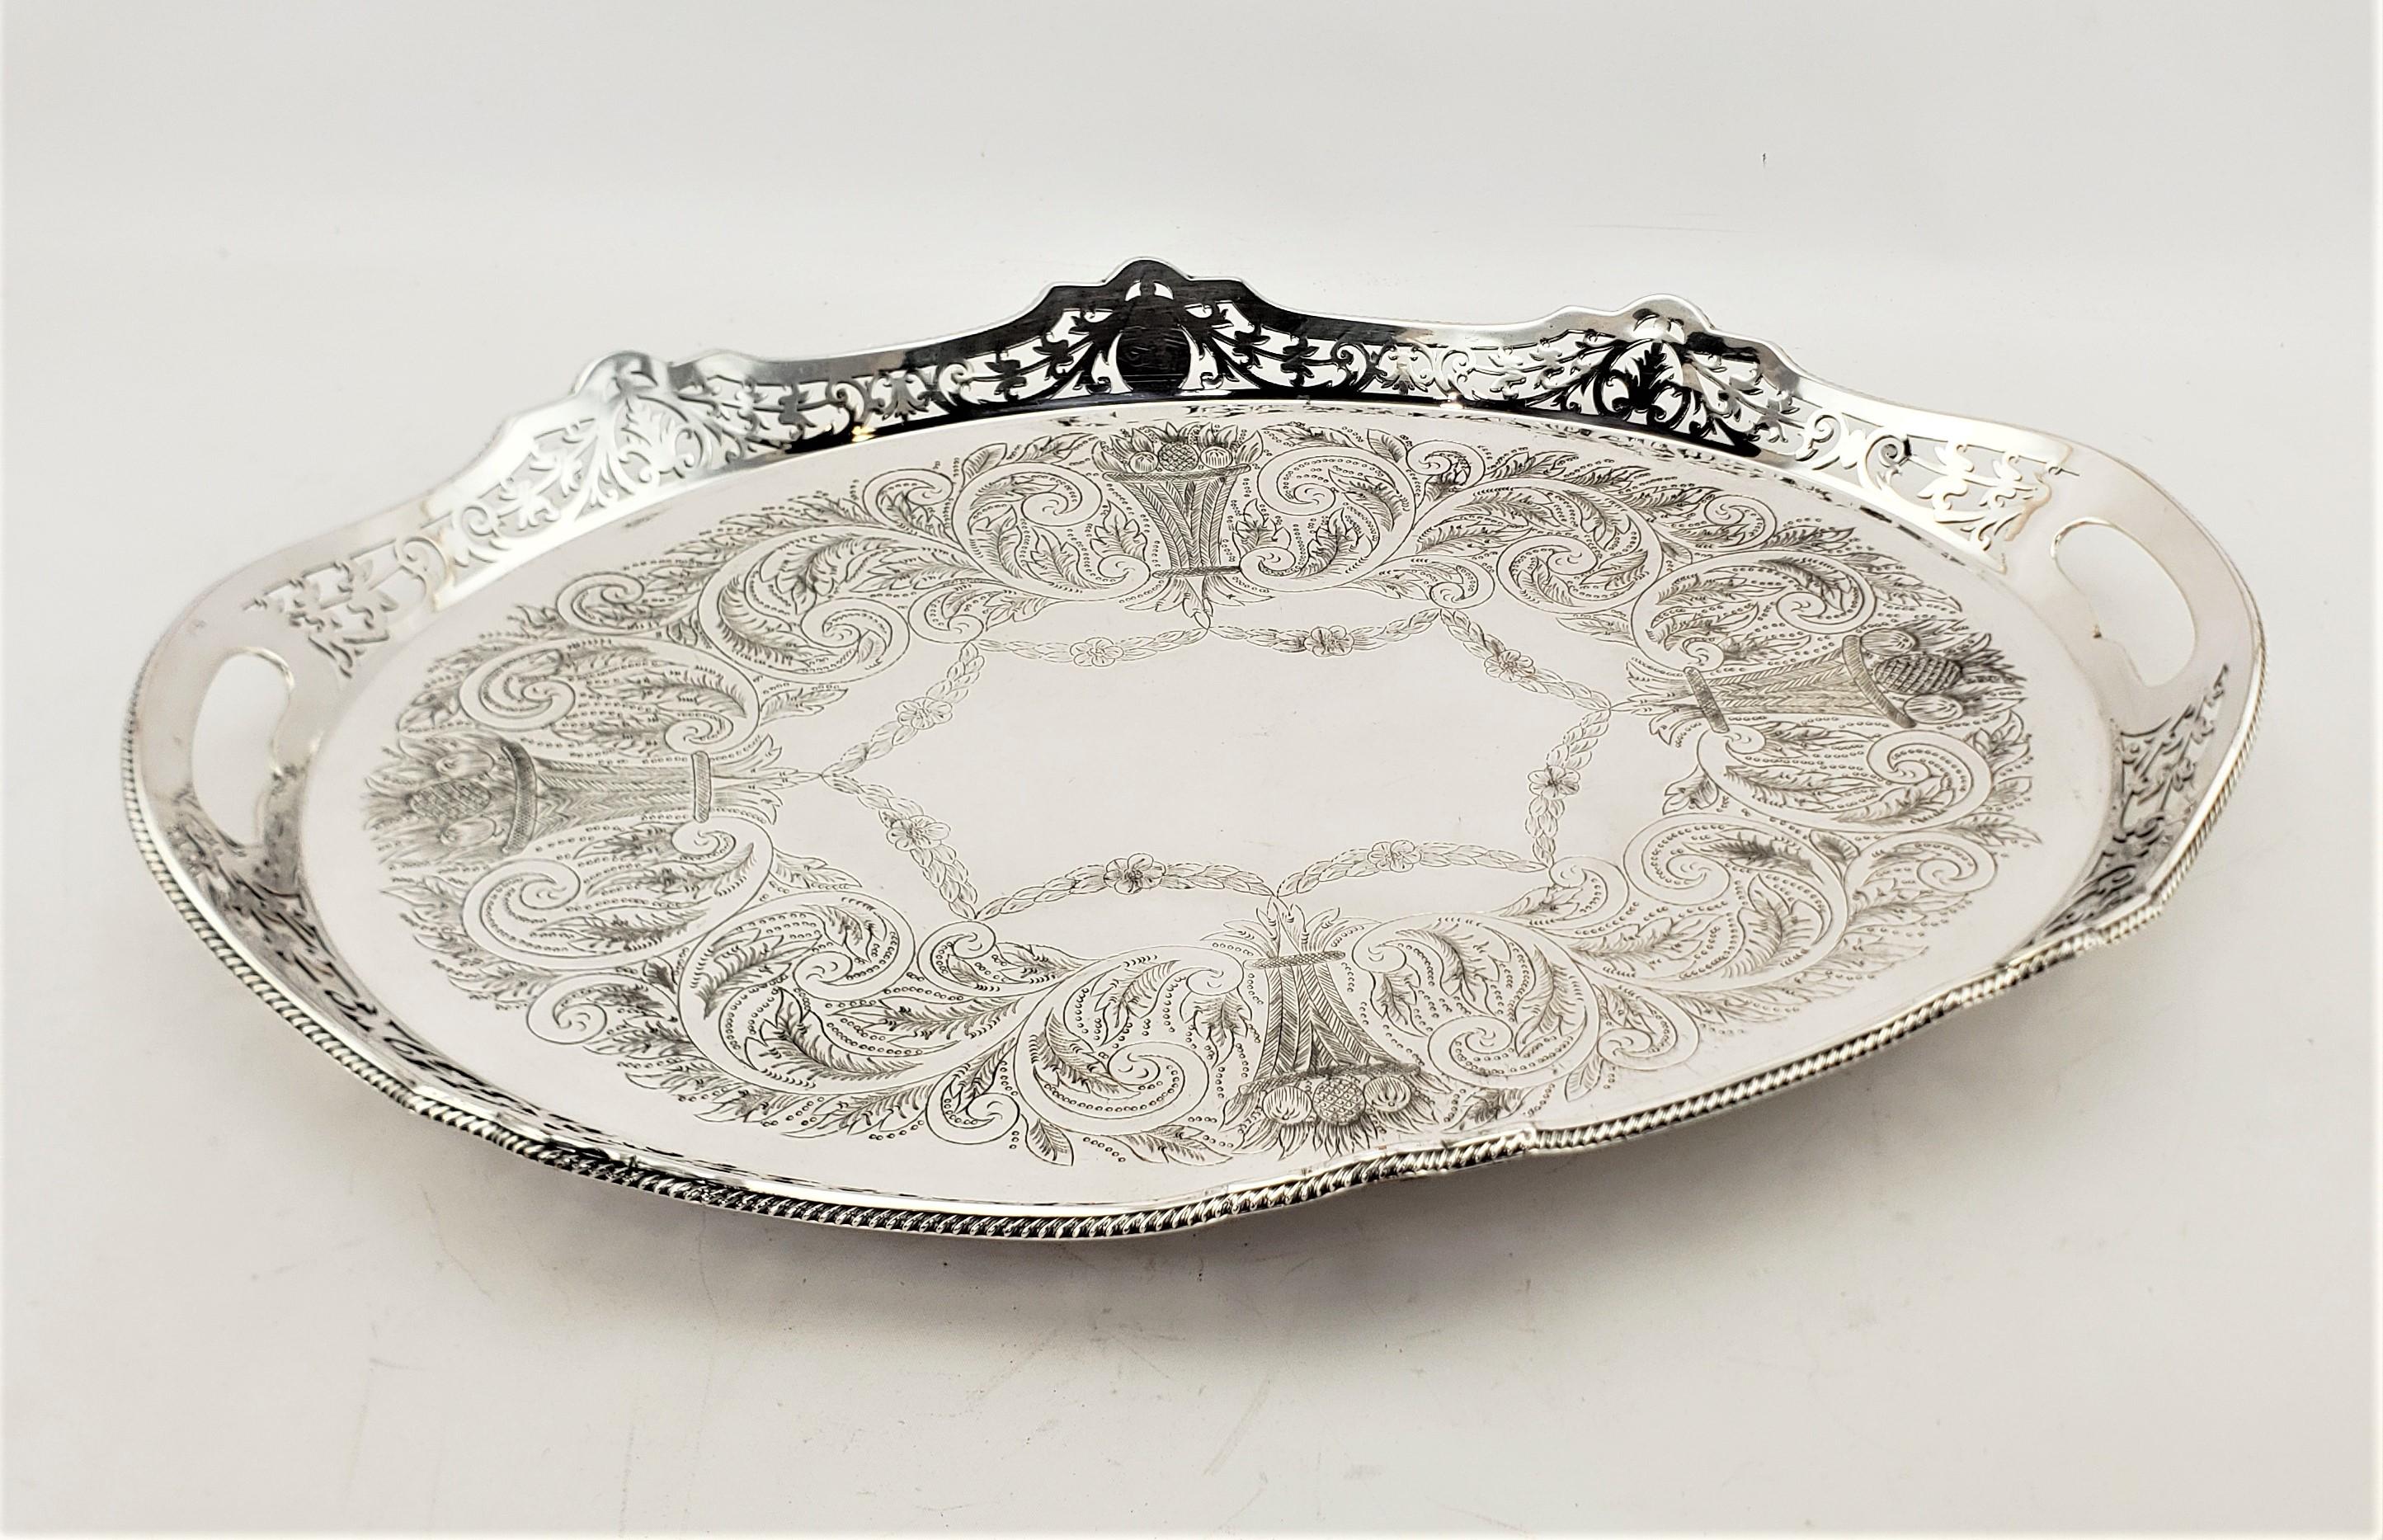 This antique silver plated and footed gallery serving tray is hallmarked by an unknown maker, and presumed to have originated from England and date to approximately 1920 and done in a Victorian style. This large tray is oval with an serpentine